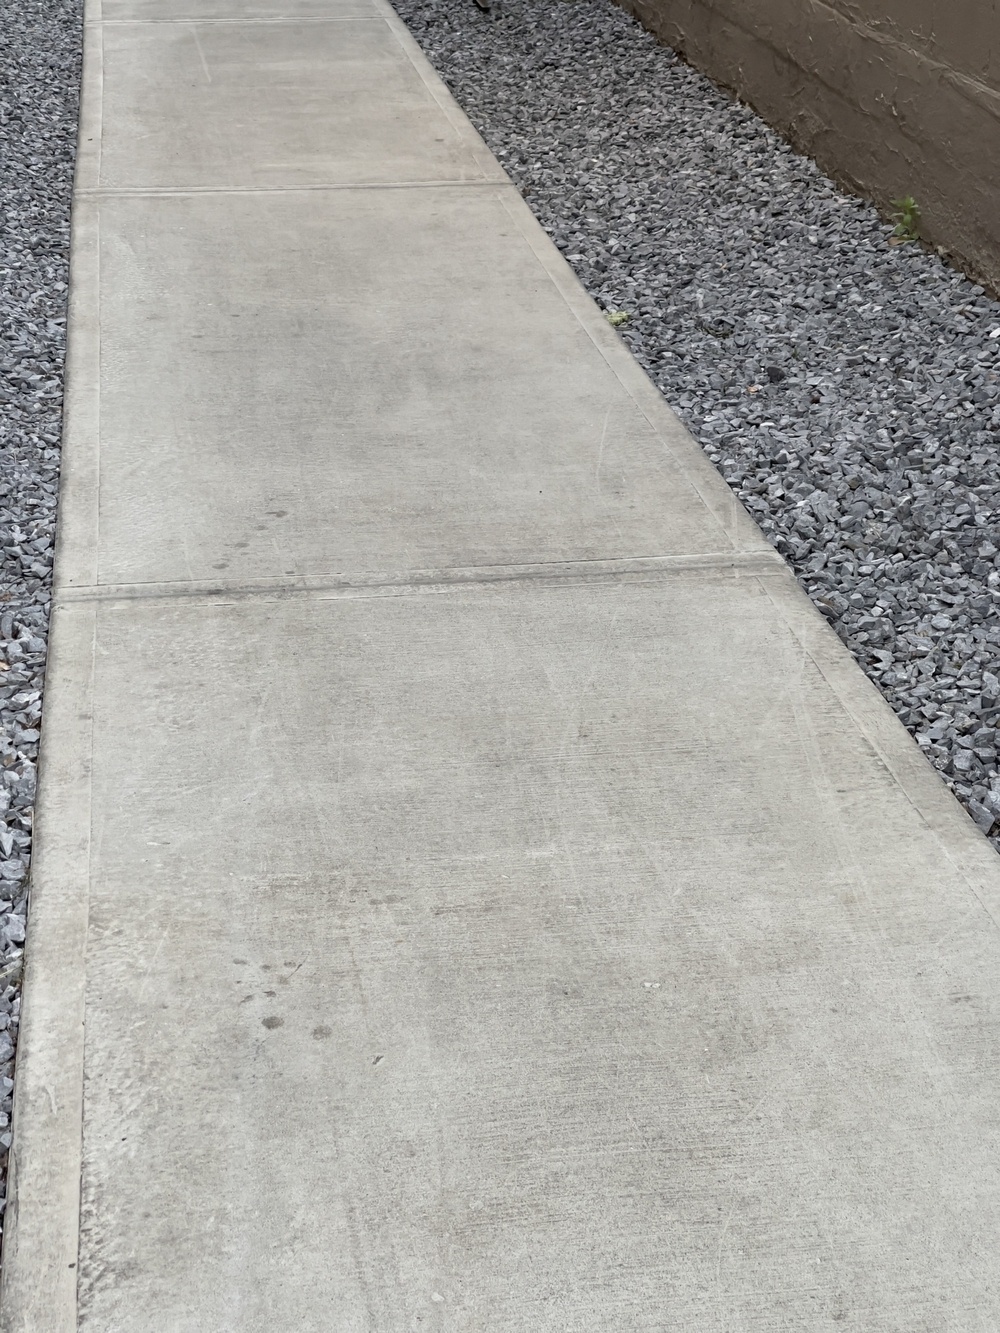 Sidewalk with gravel on both sides and part of a brick wall. Parallel lines converge towards the left corner.